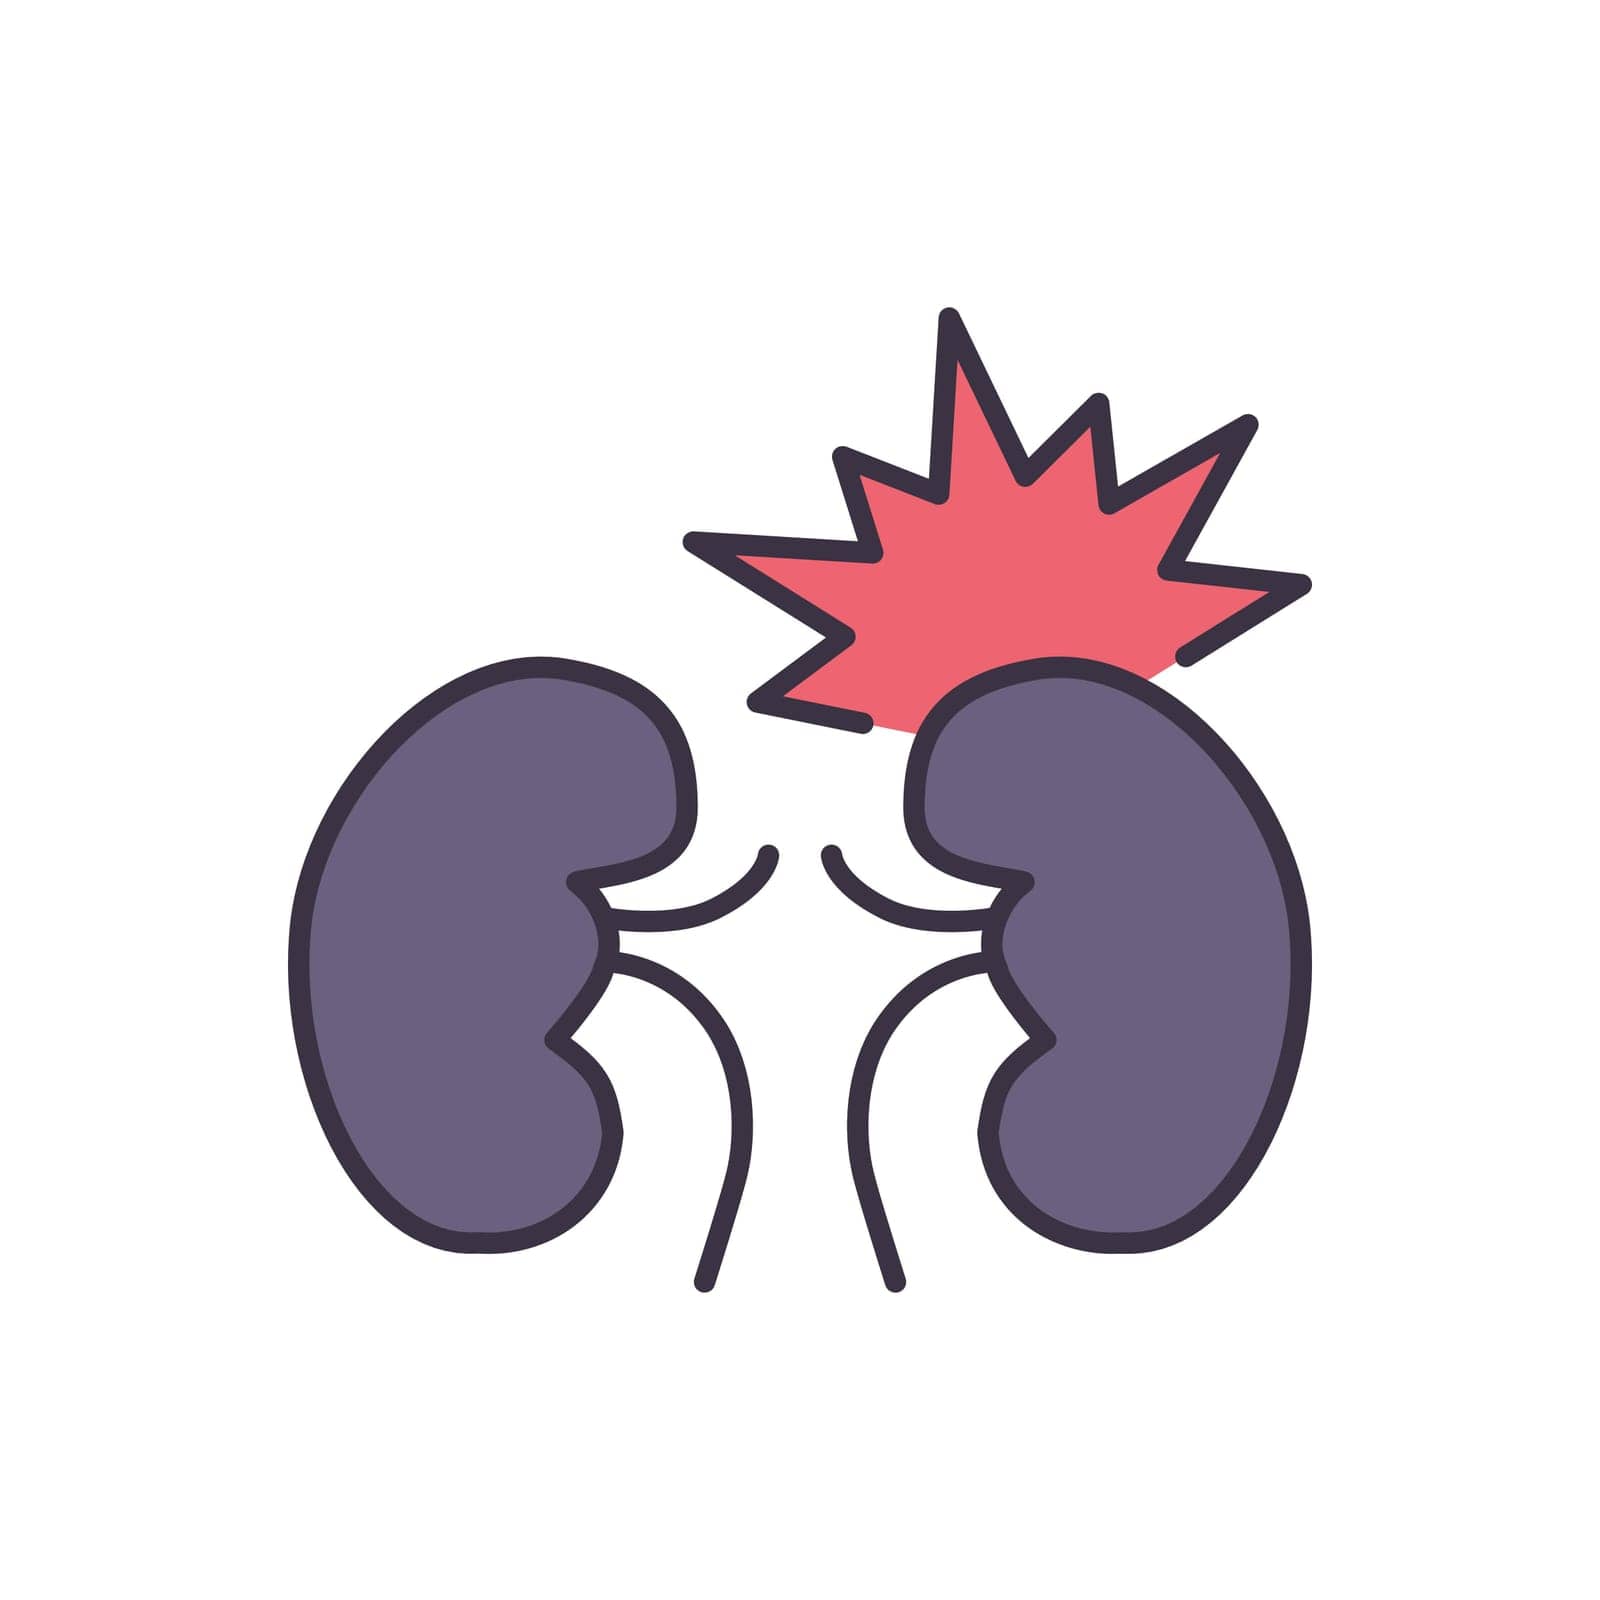 Kidney pain related vector icon. Kidney pain sign. Isolated on white background. Editable vector illustration